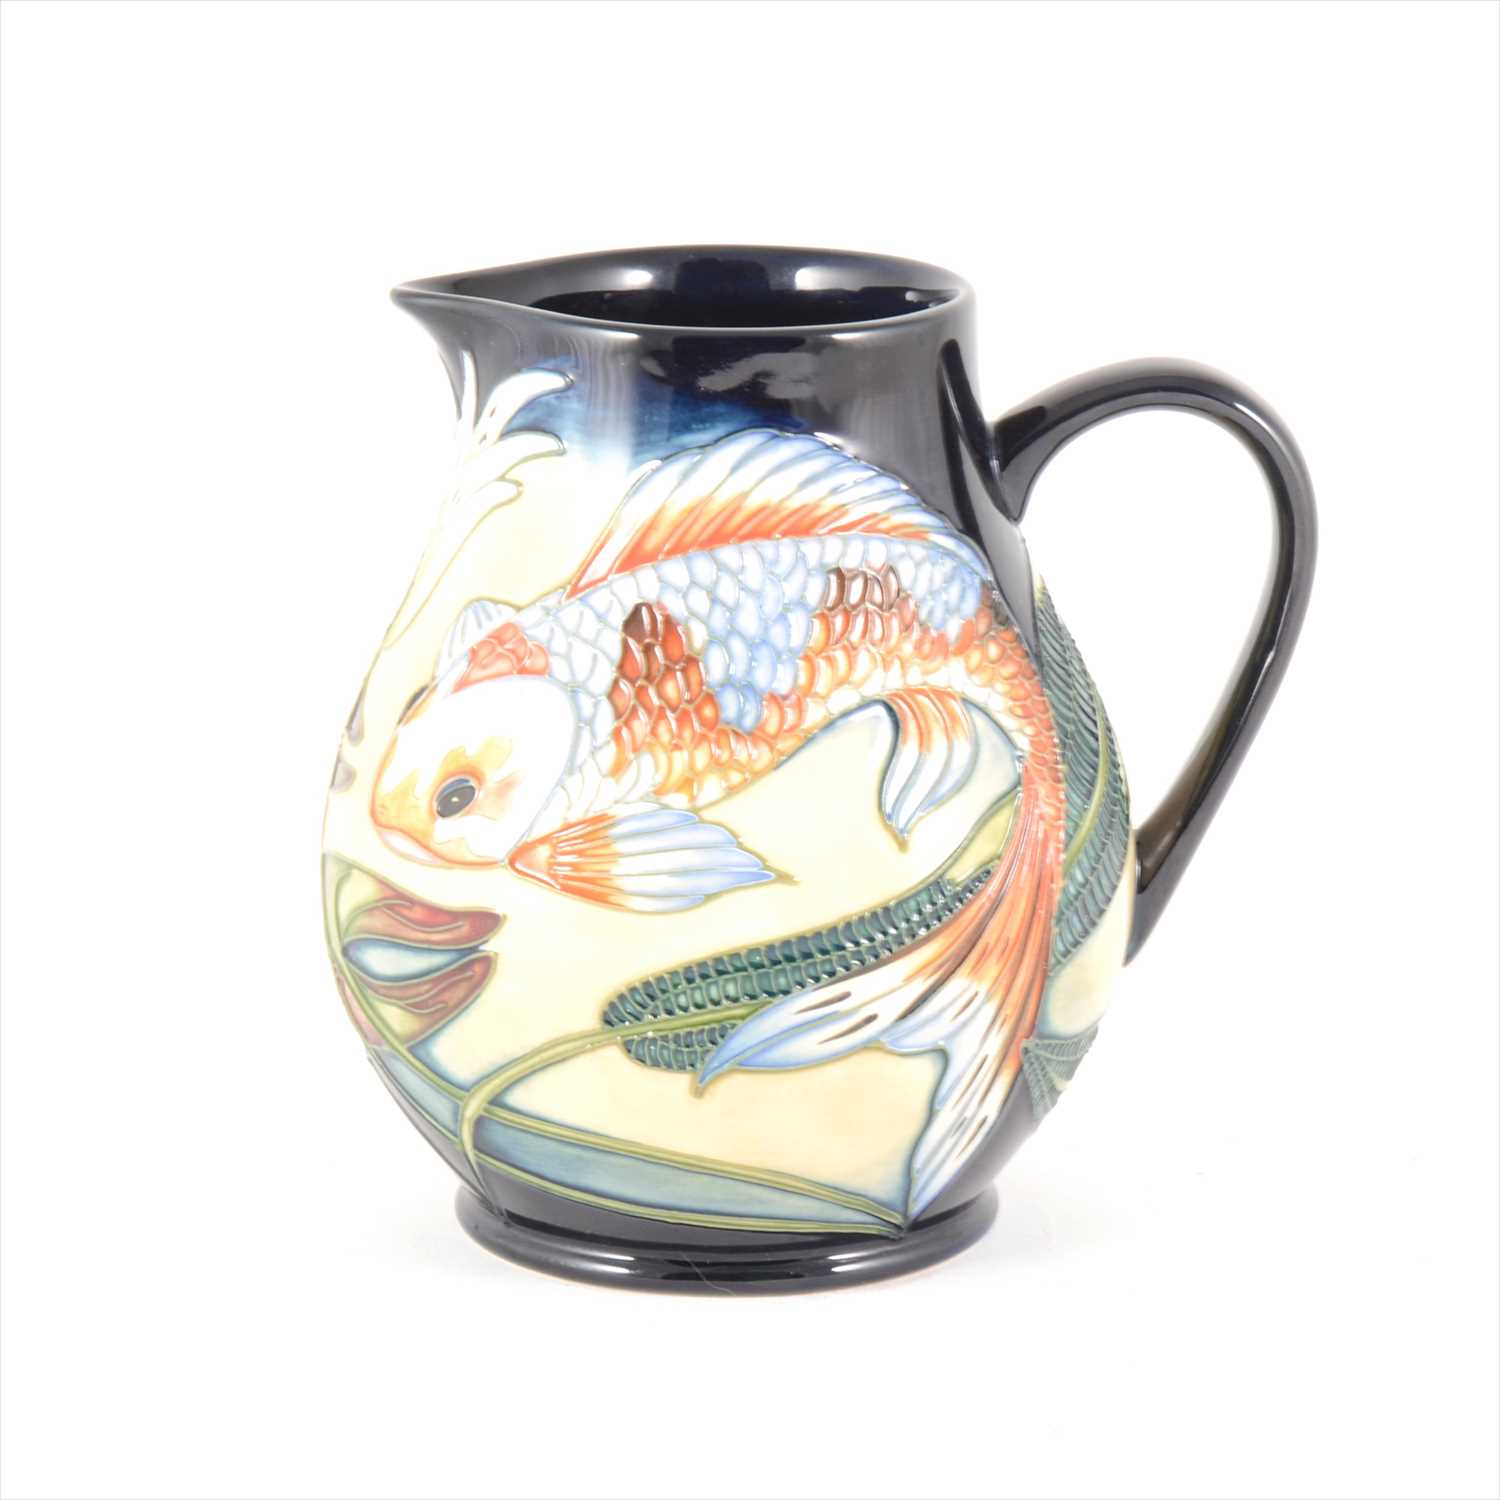 Lot 27 - A 'Quiet Waters' Moorcroft Pottery jug, designed by Philip Gibson